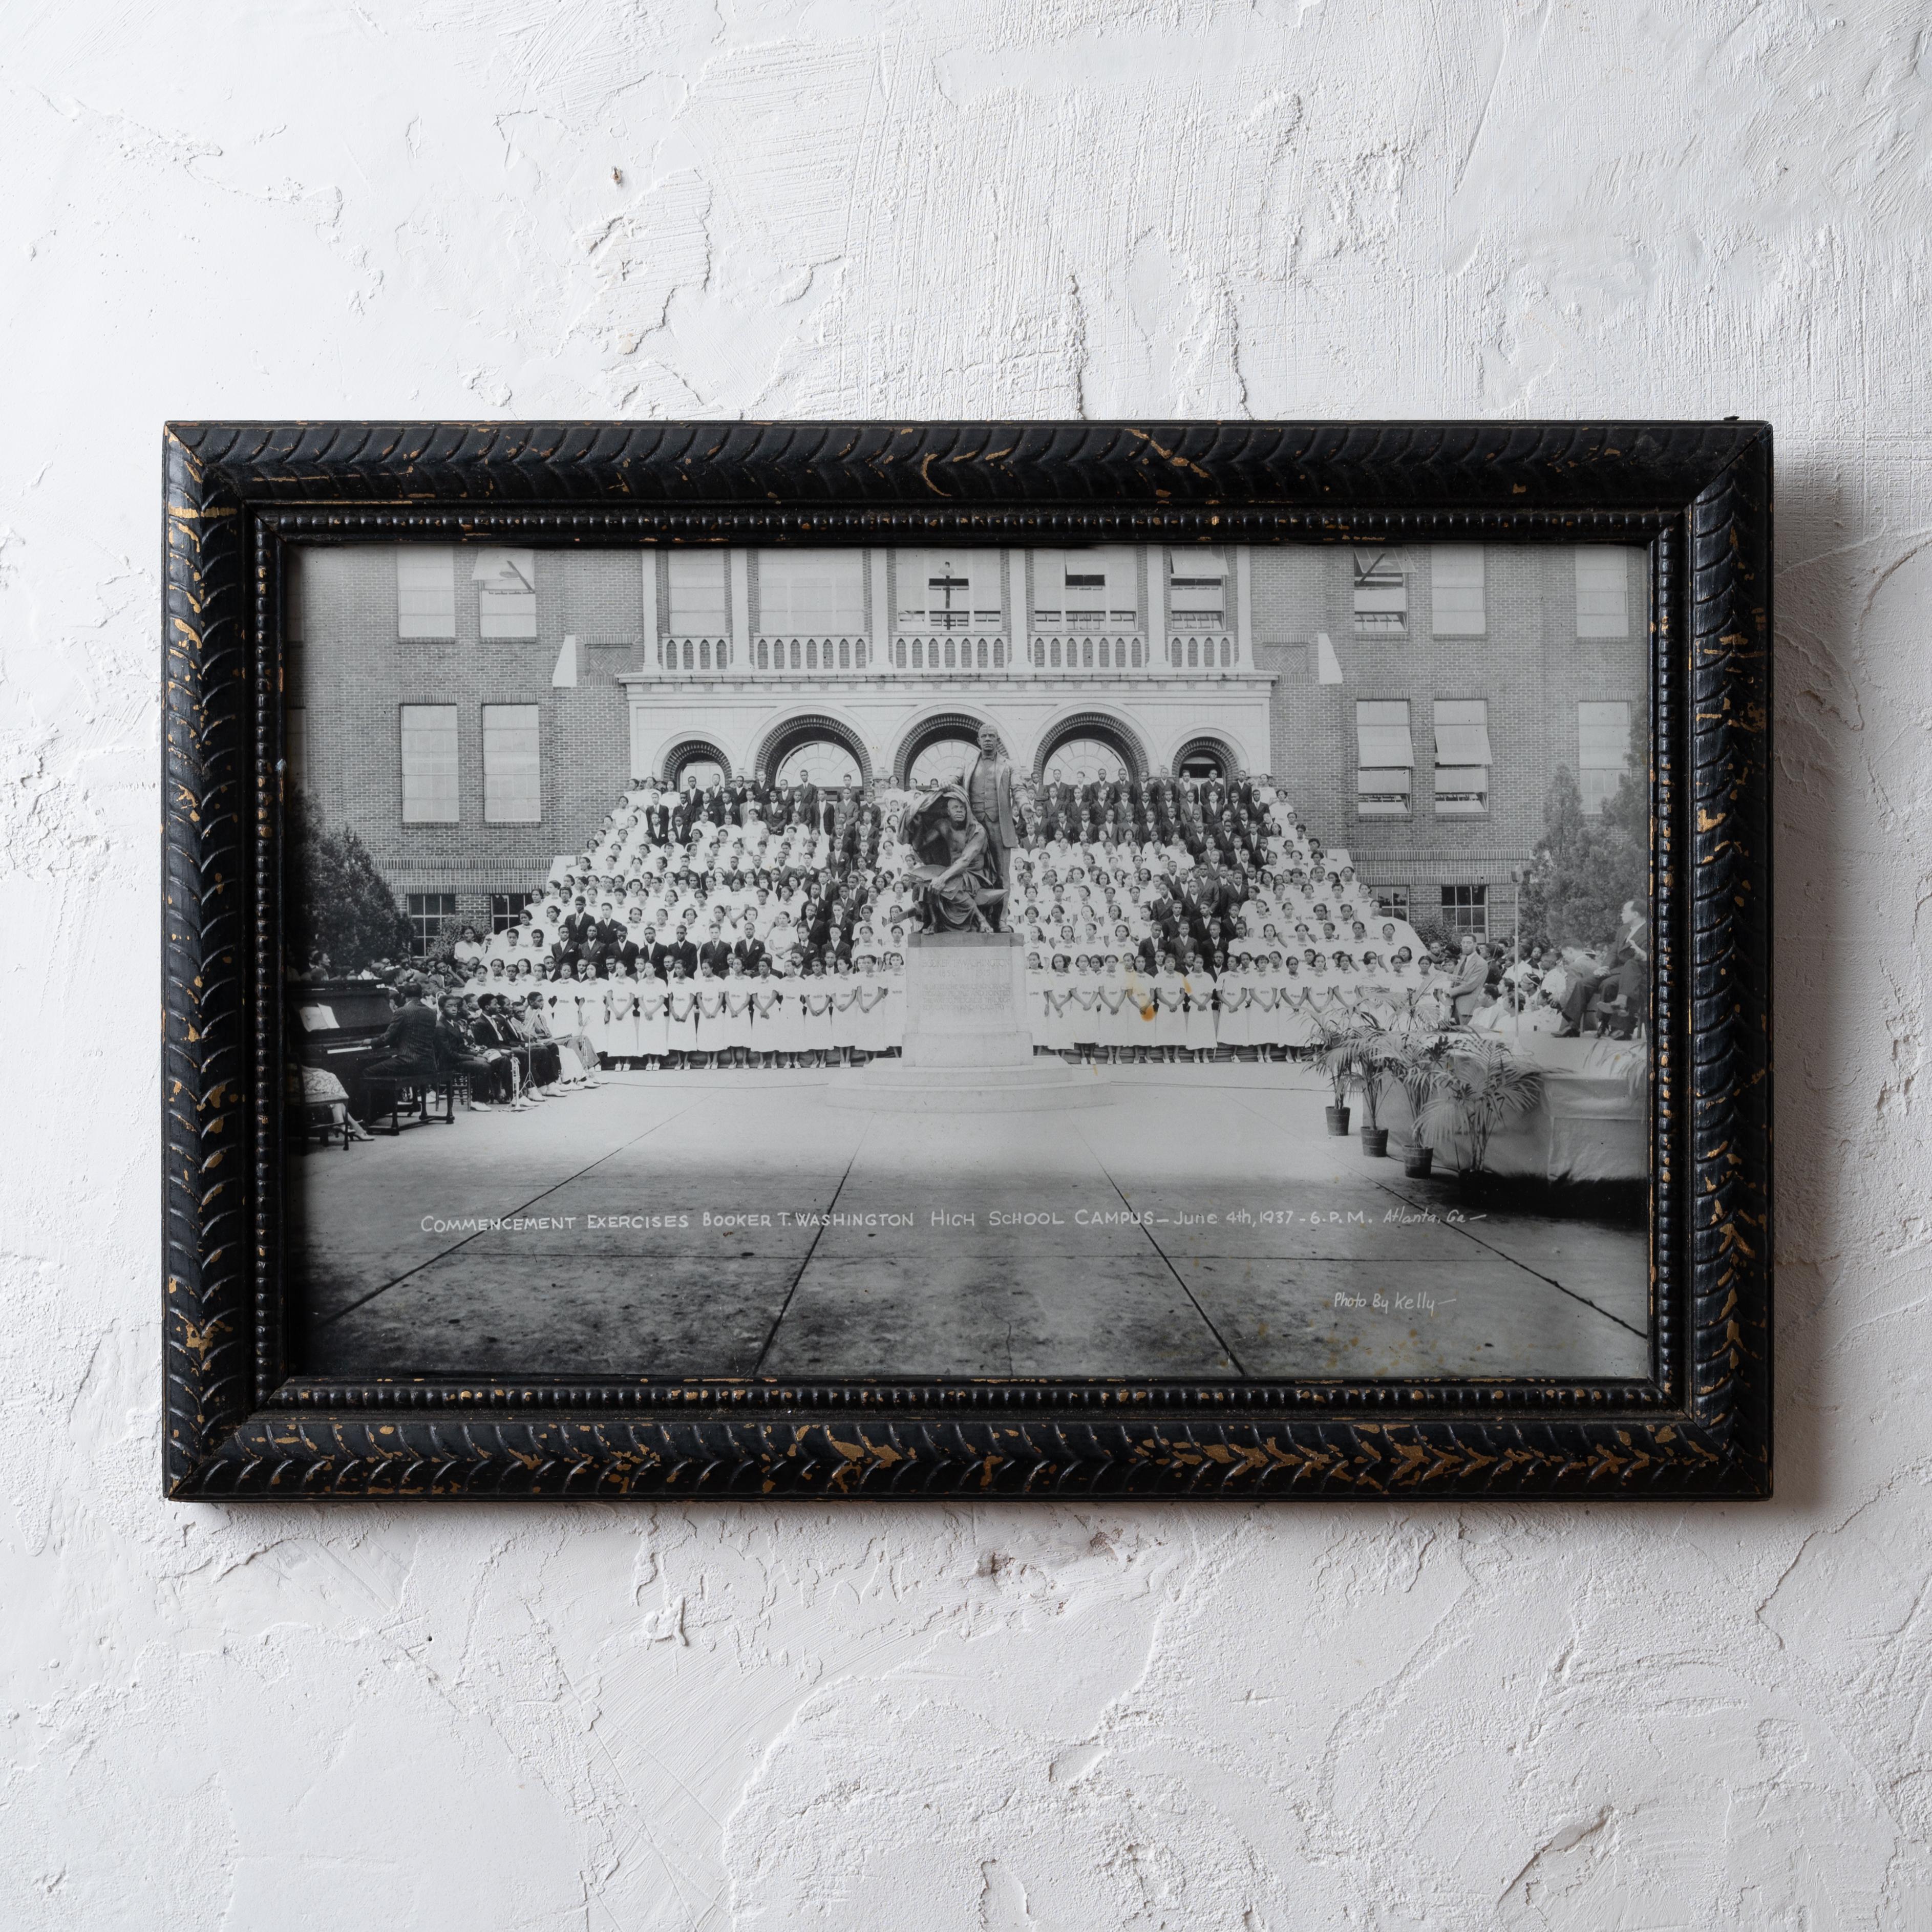 An original photograph of the Booker T. Washington High School commencement excercizes from 1937.  

20 ½ by 13 ¾ inches

Good condition. In original period frame with wear; spots of foxing to photograph.
